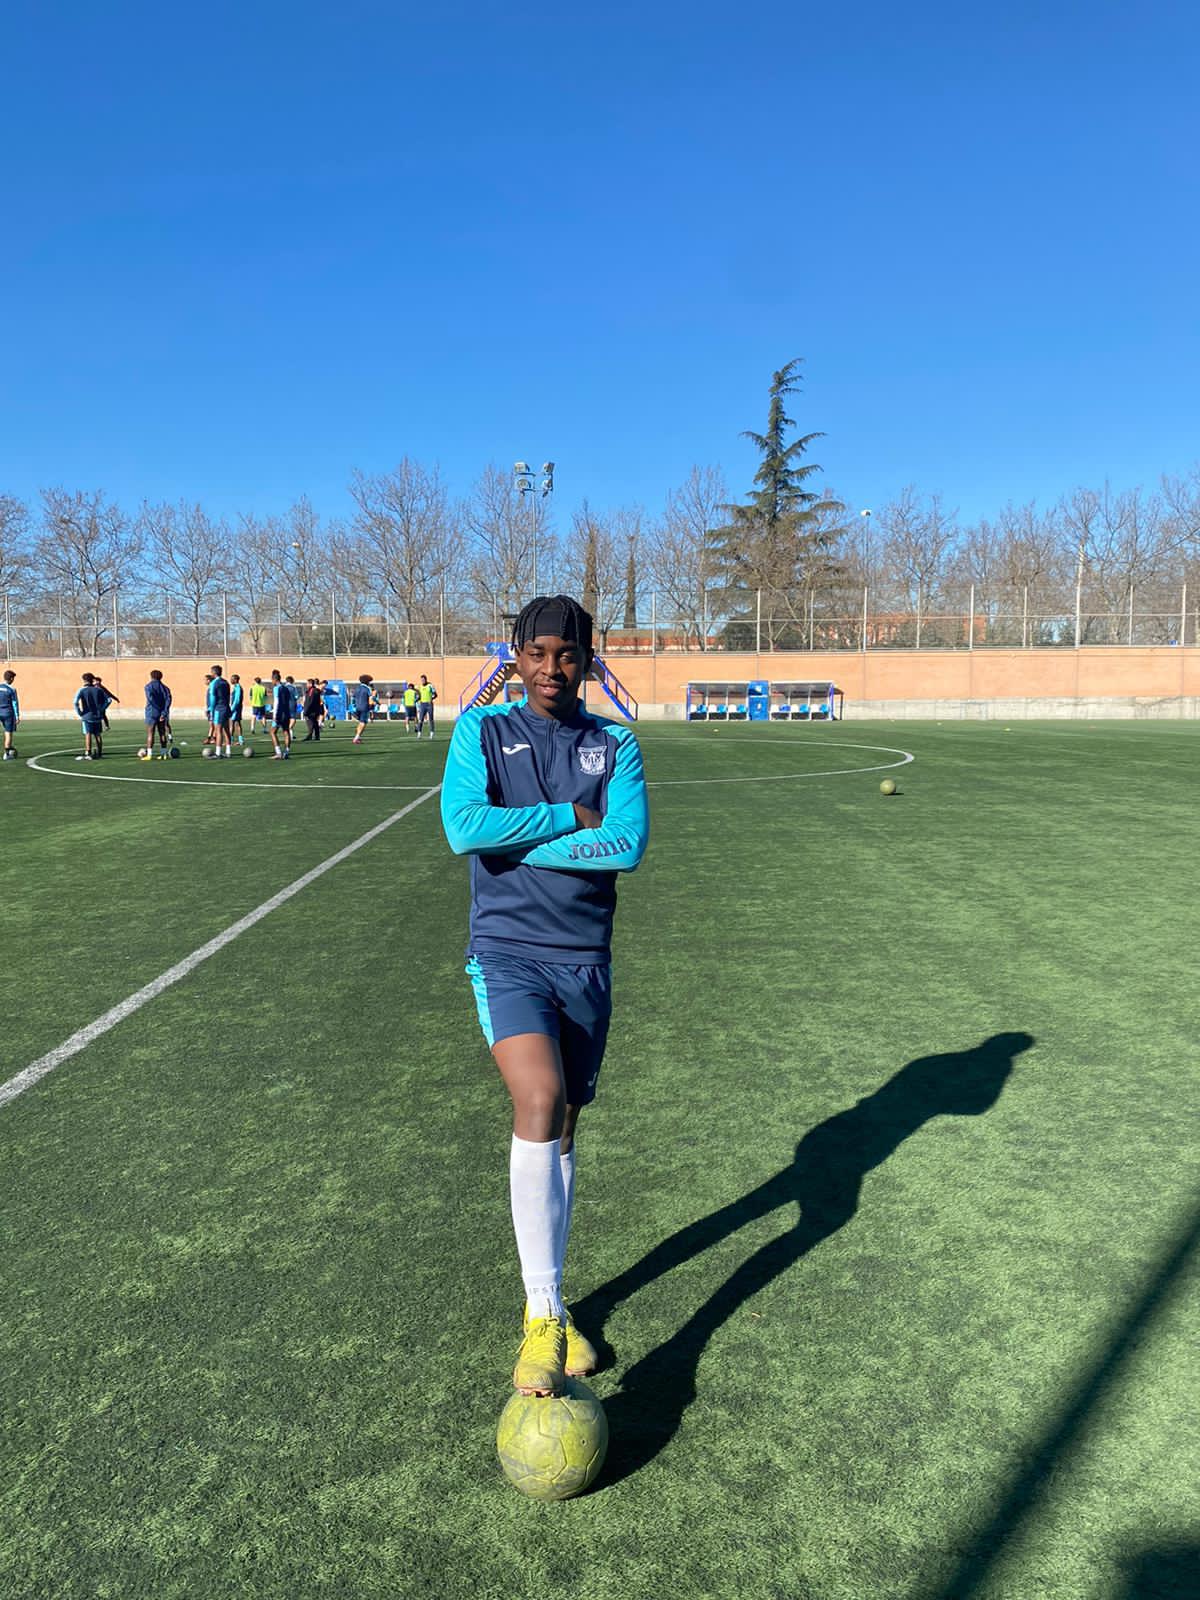  Nkateko Mangolela Opens Up On South Africa Dream, Excited To Sign CD Leganes Deal